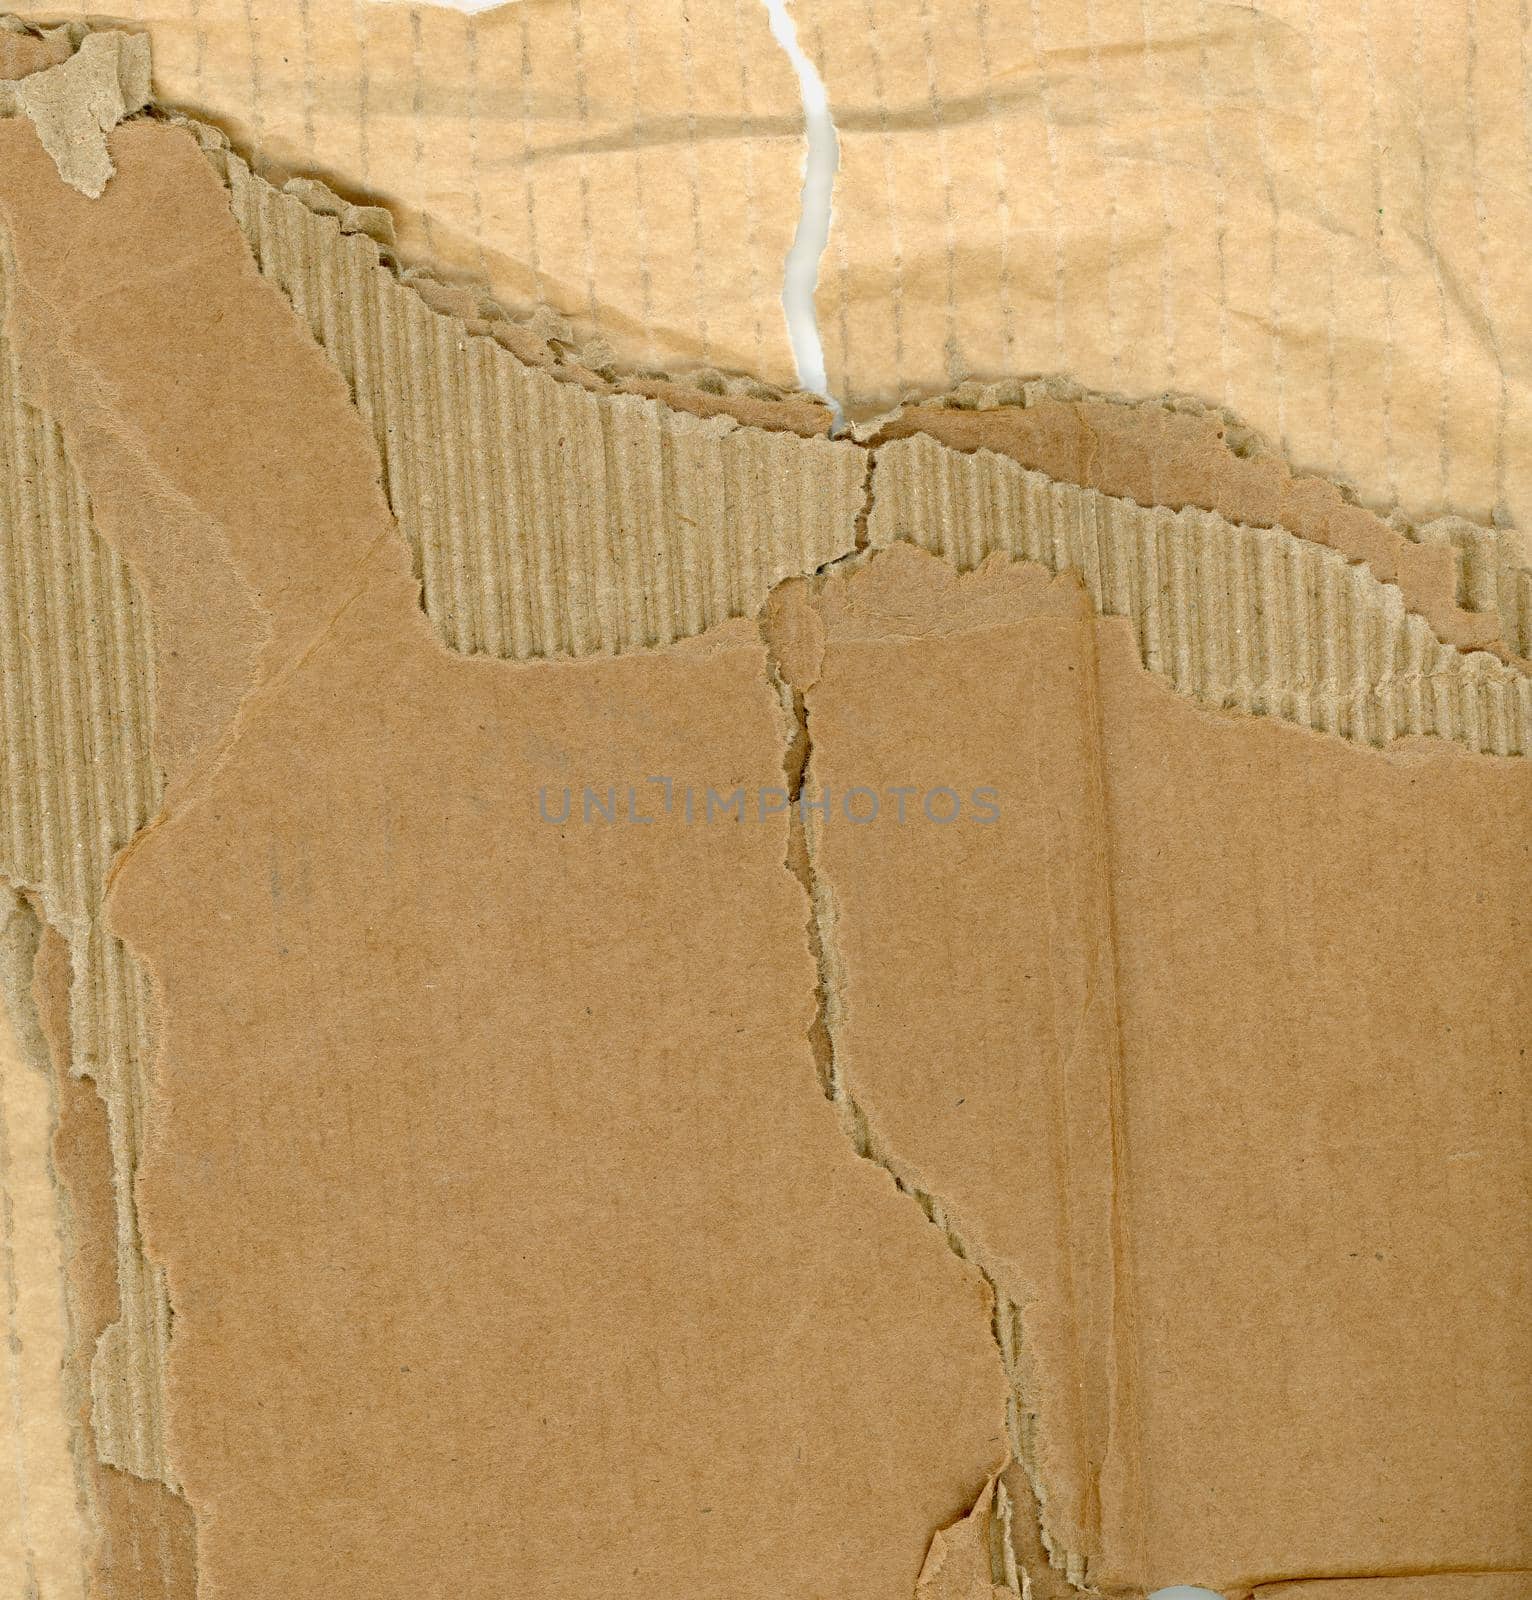 brown corrugated cardboard texture with visible layers useful as a background